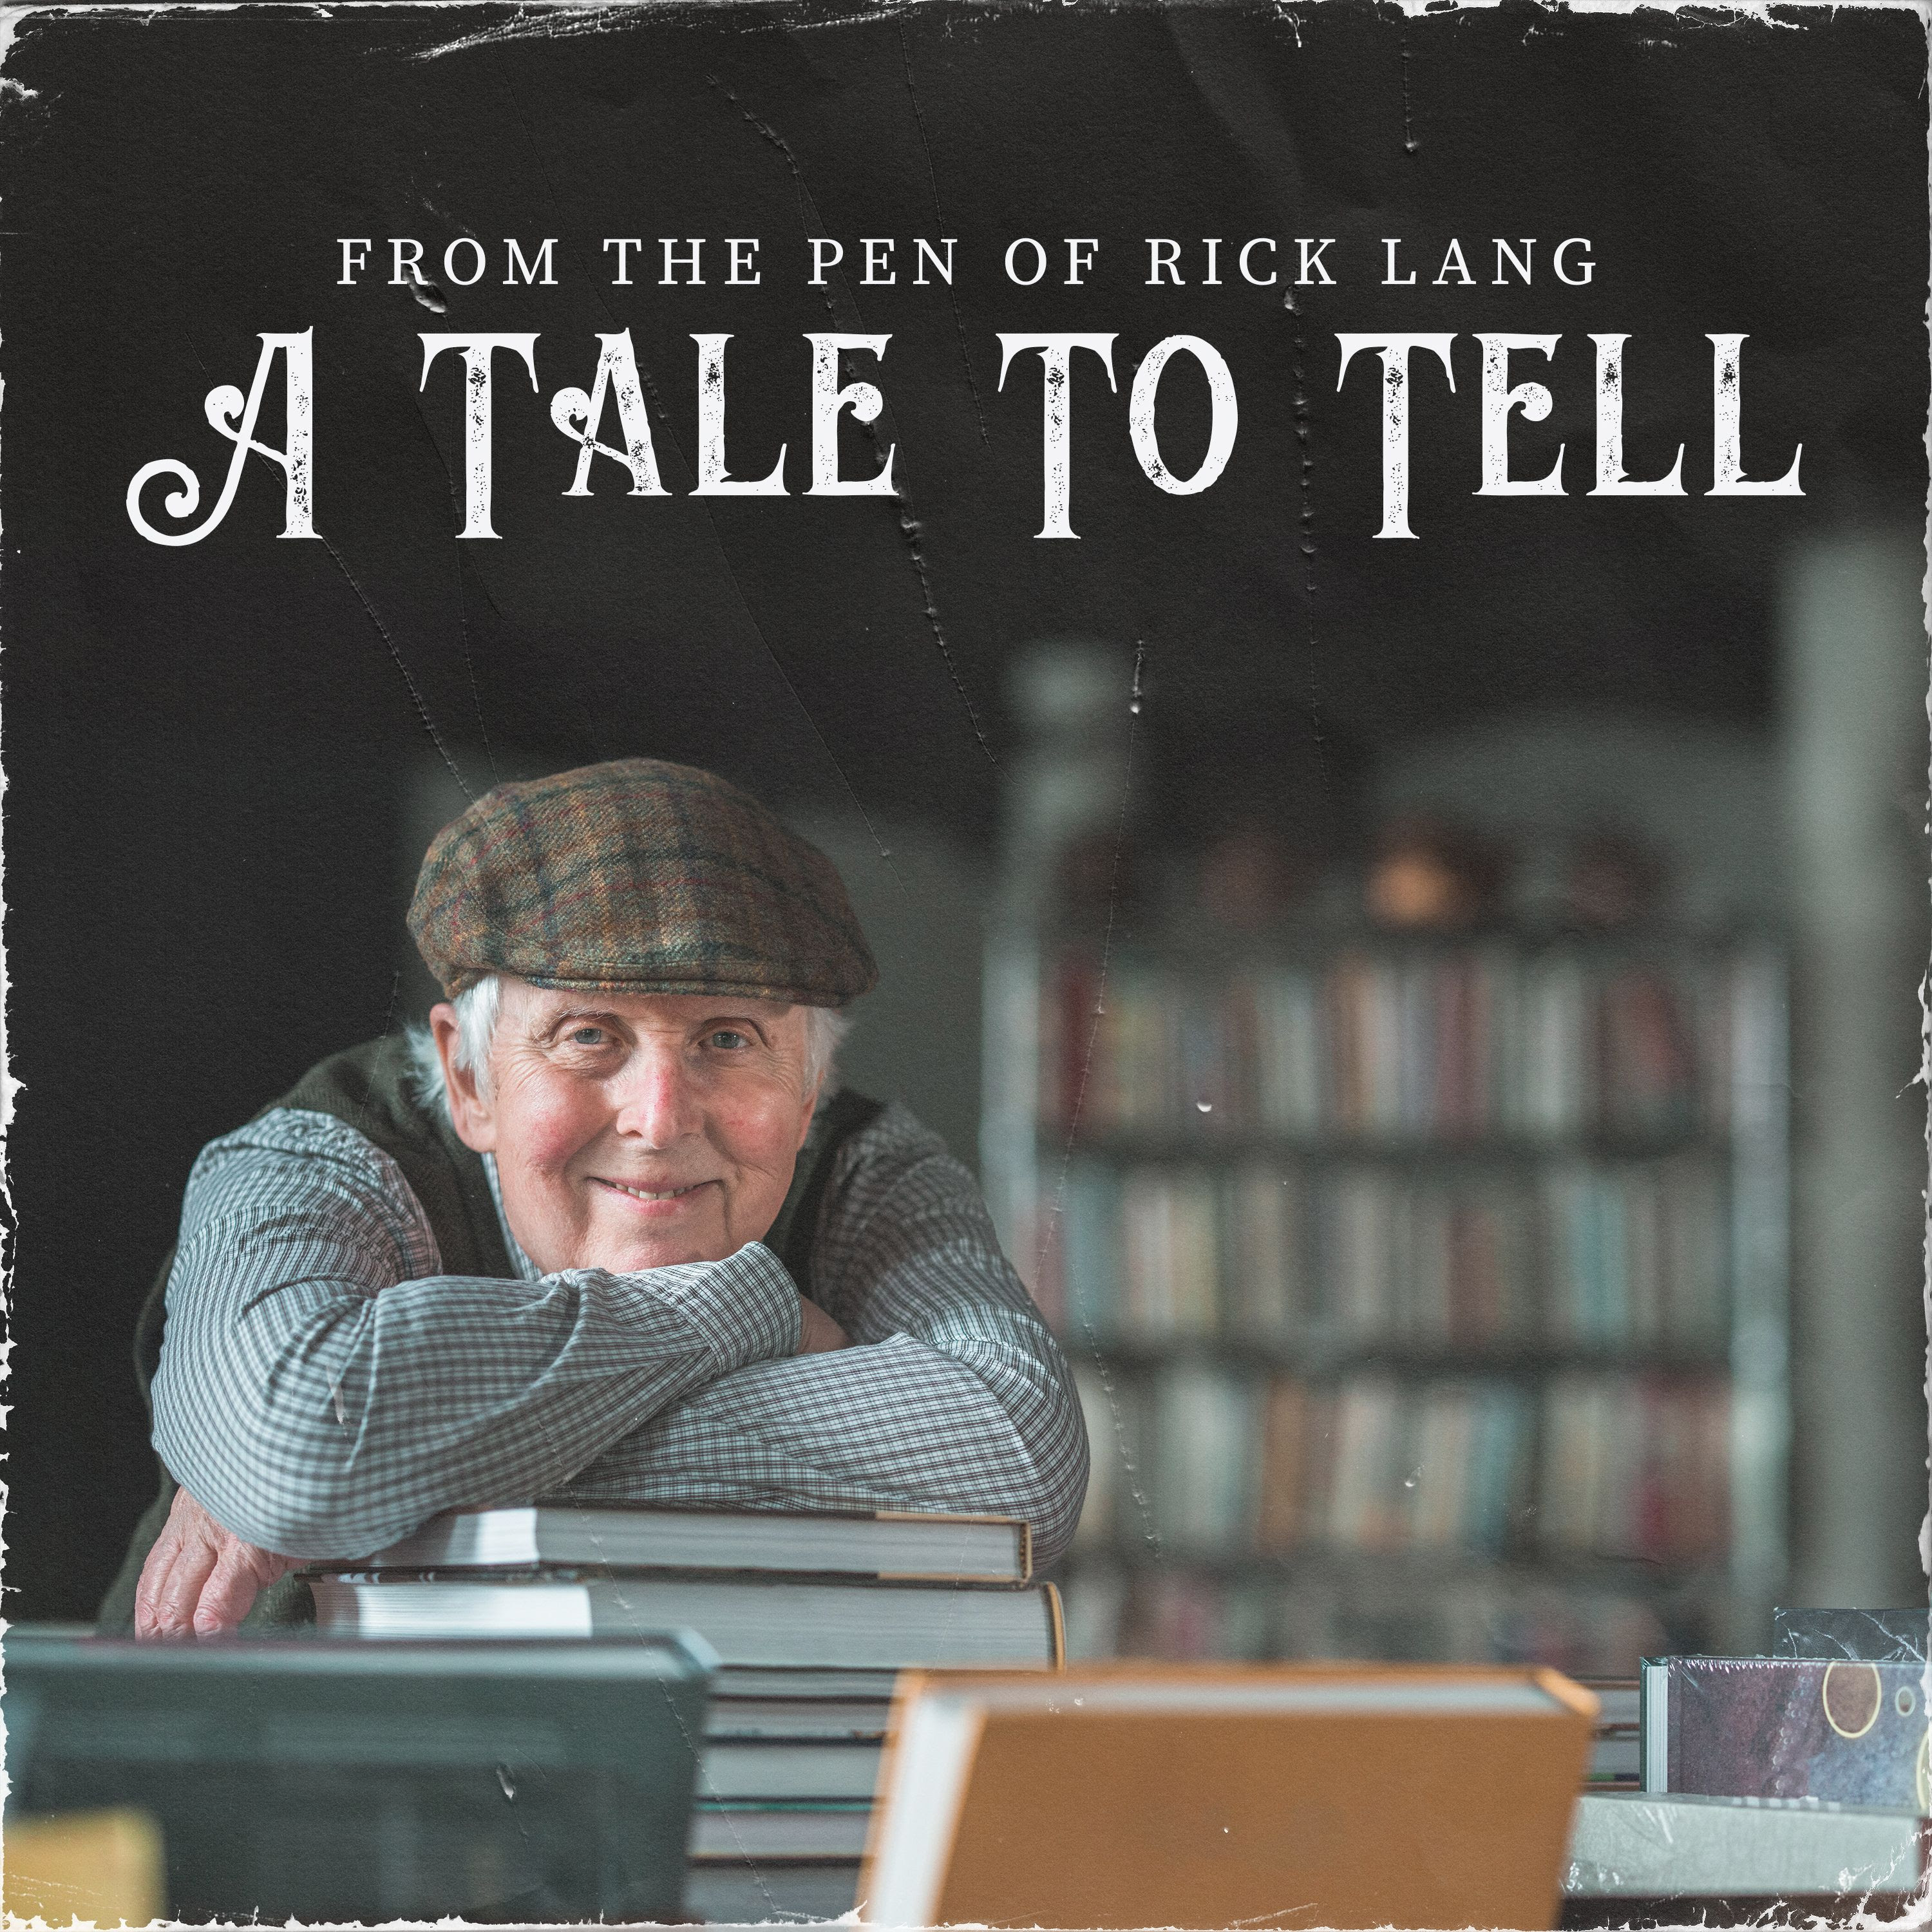 Grammy Nominated Singer-Songwriter Rick Lang Releases Narrative Album, “A Tale To Tell”